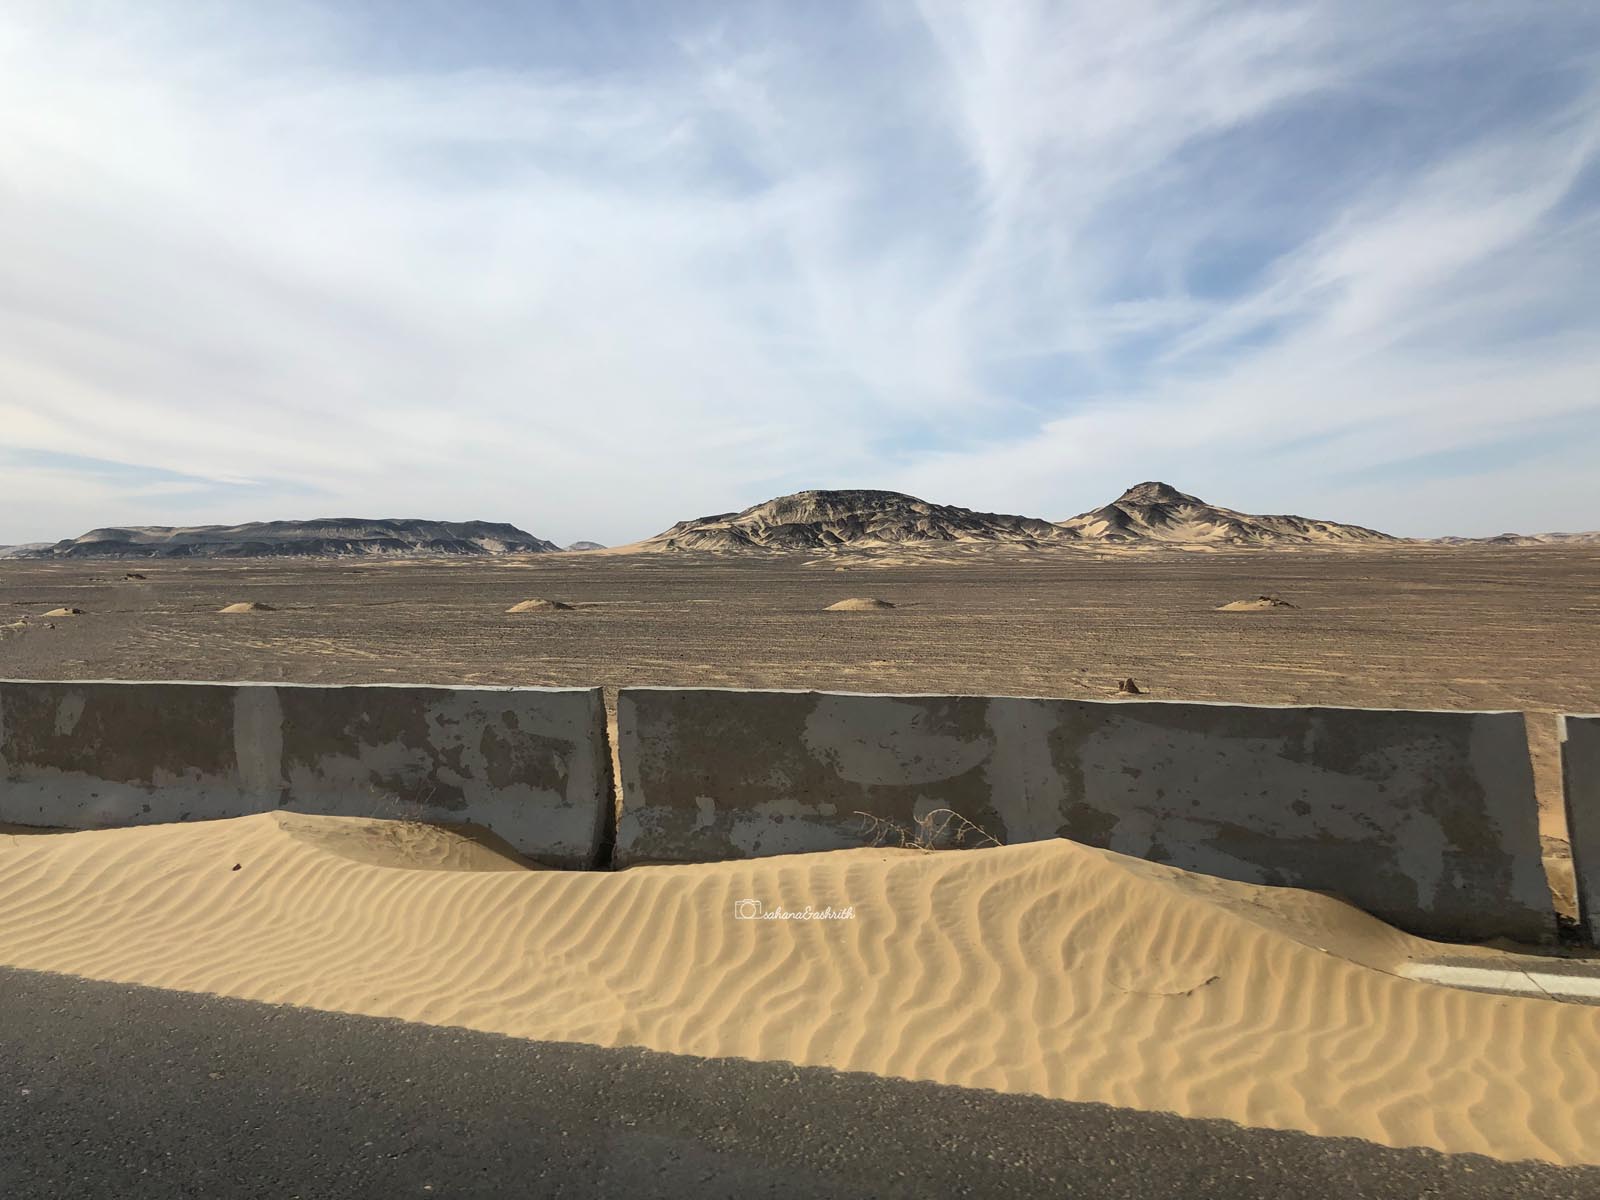 Black short mountains in brown desert with sand touching the side walls of a highway road